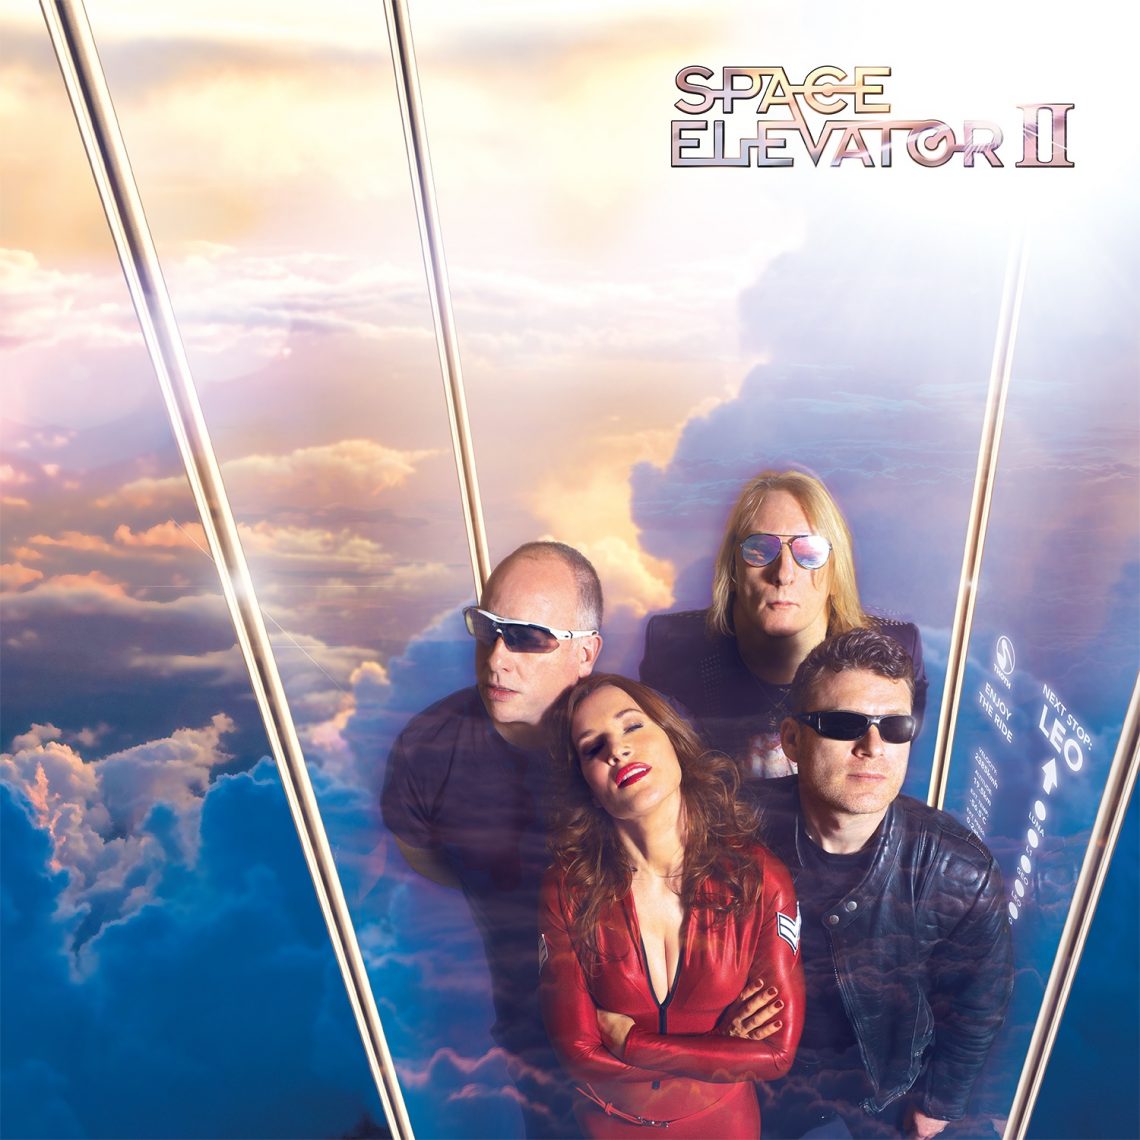 SPACE ELEVATOR perform Rush classic live in tribute to Neil Peart, Russ Ballard tour dates also confirmed!